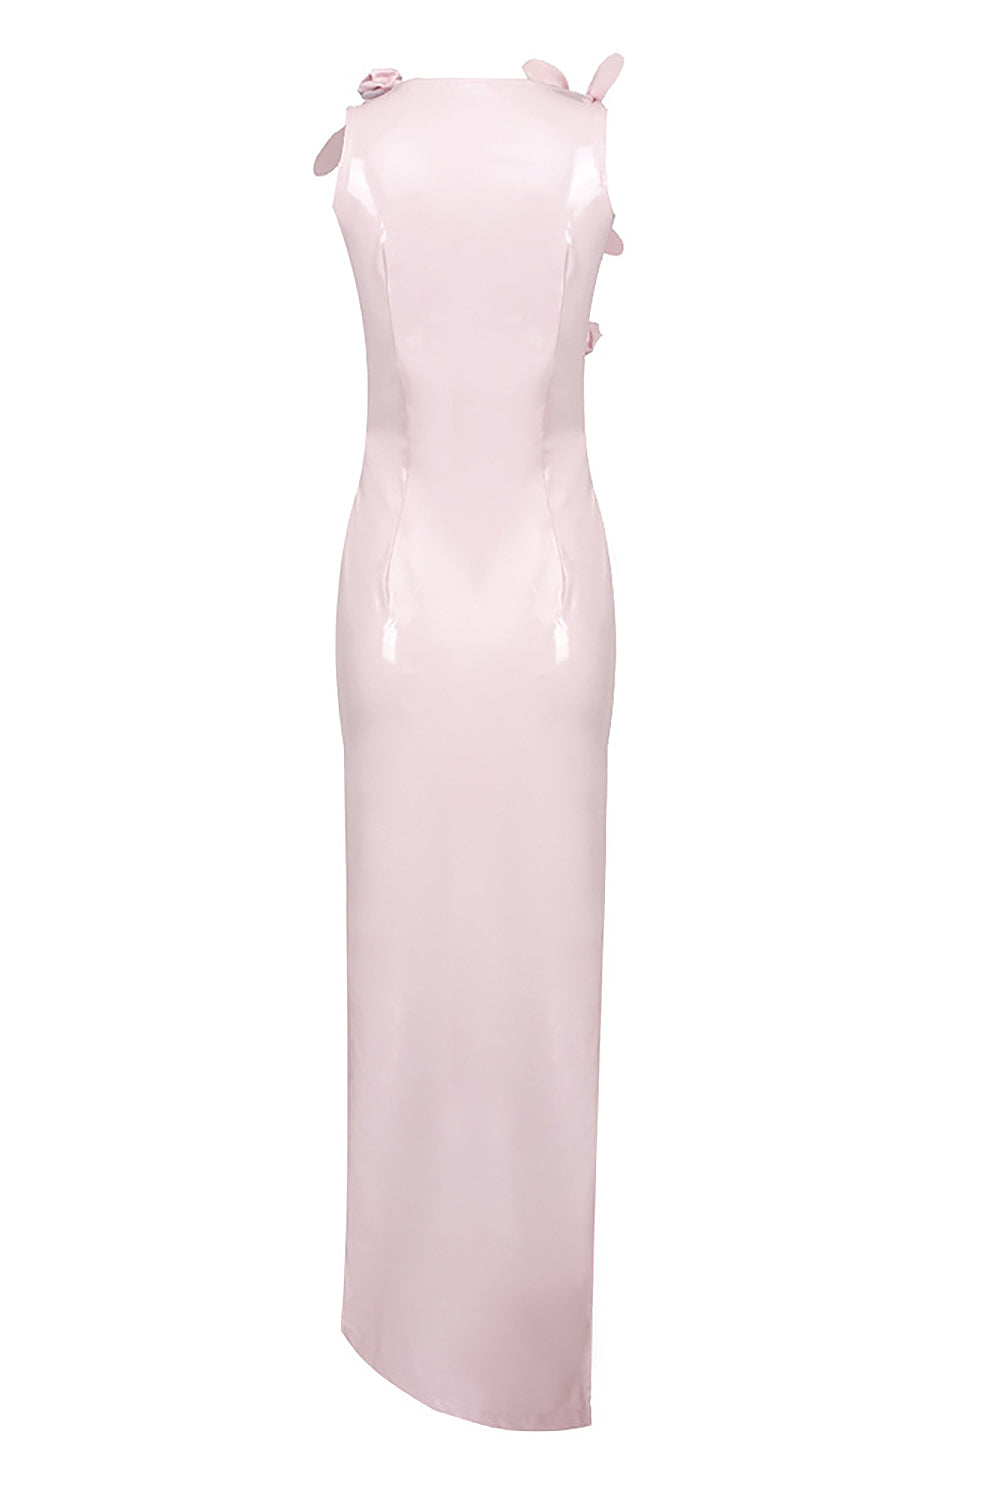 kylie Jenner Glam with Edgy Skintight Latex Gown In White Pink